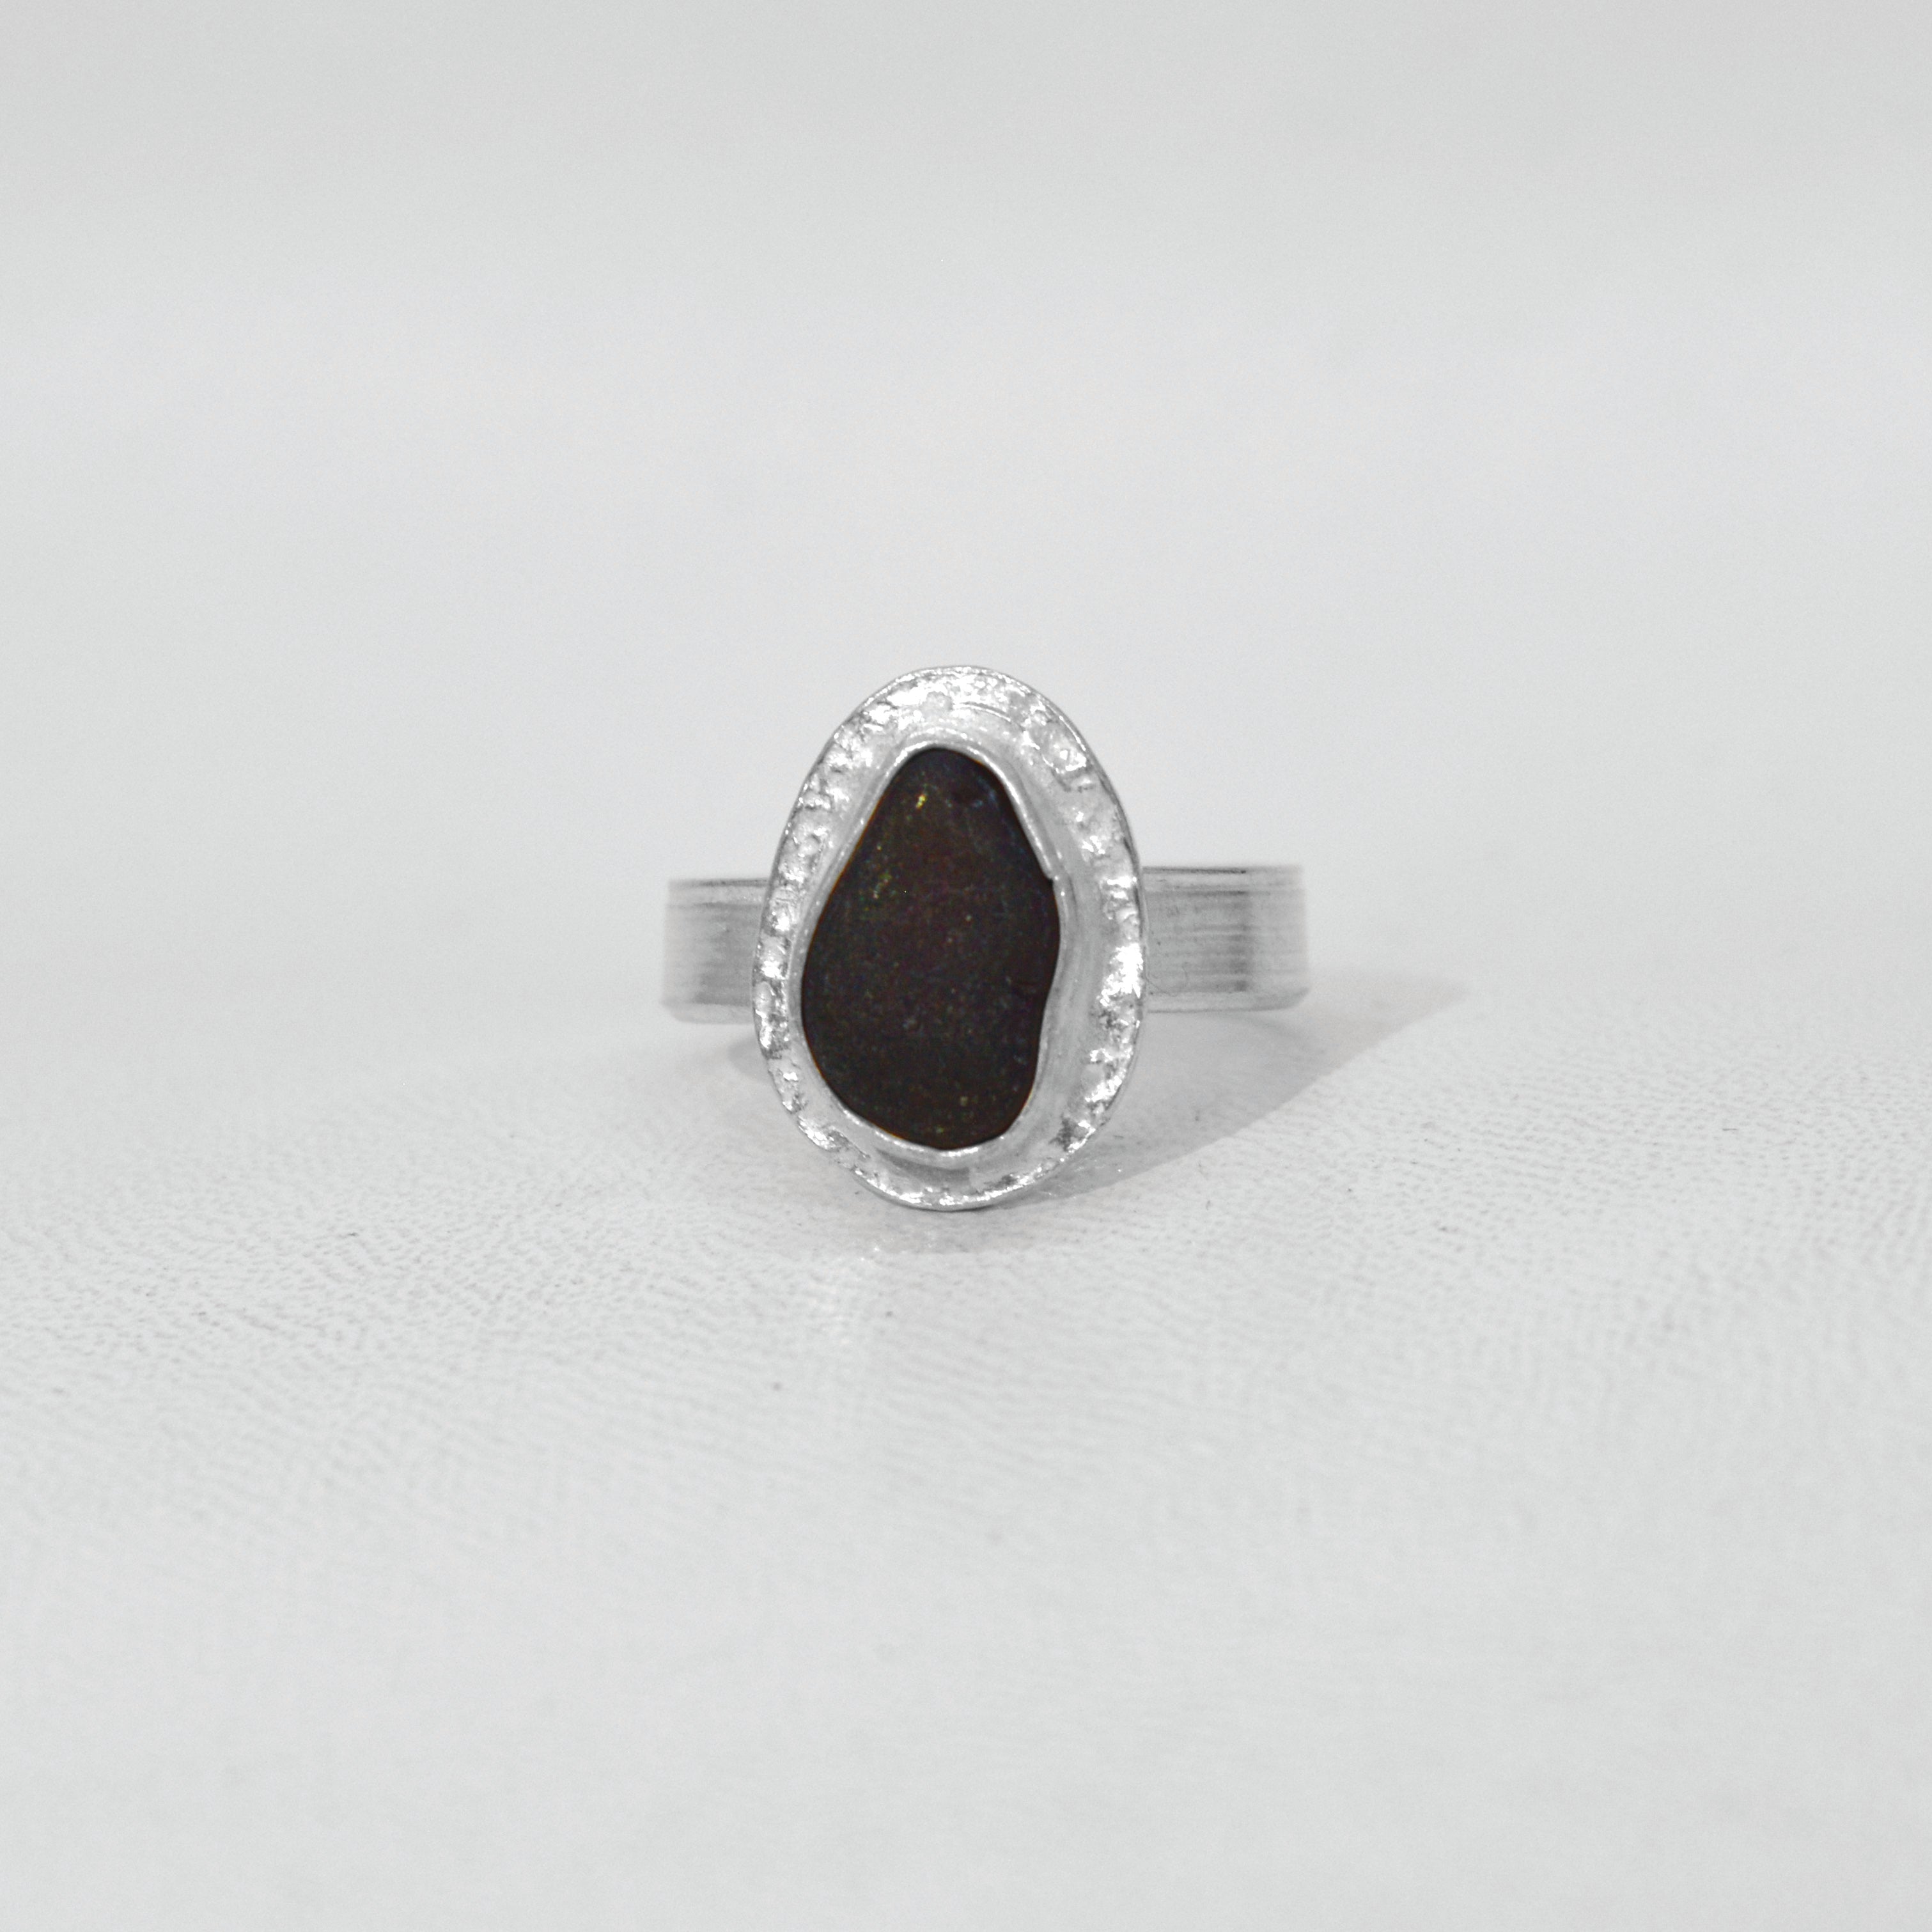 Black Seaglass Sterling Silver Ring (Pirate Glass)